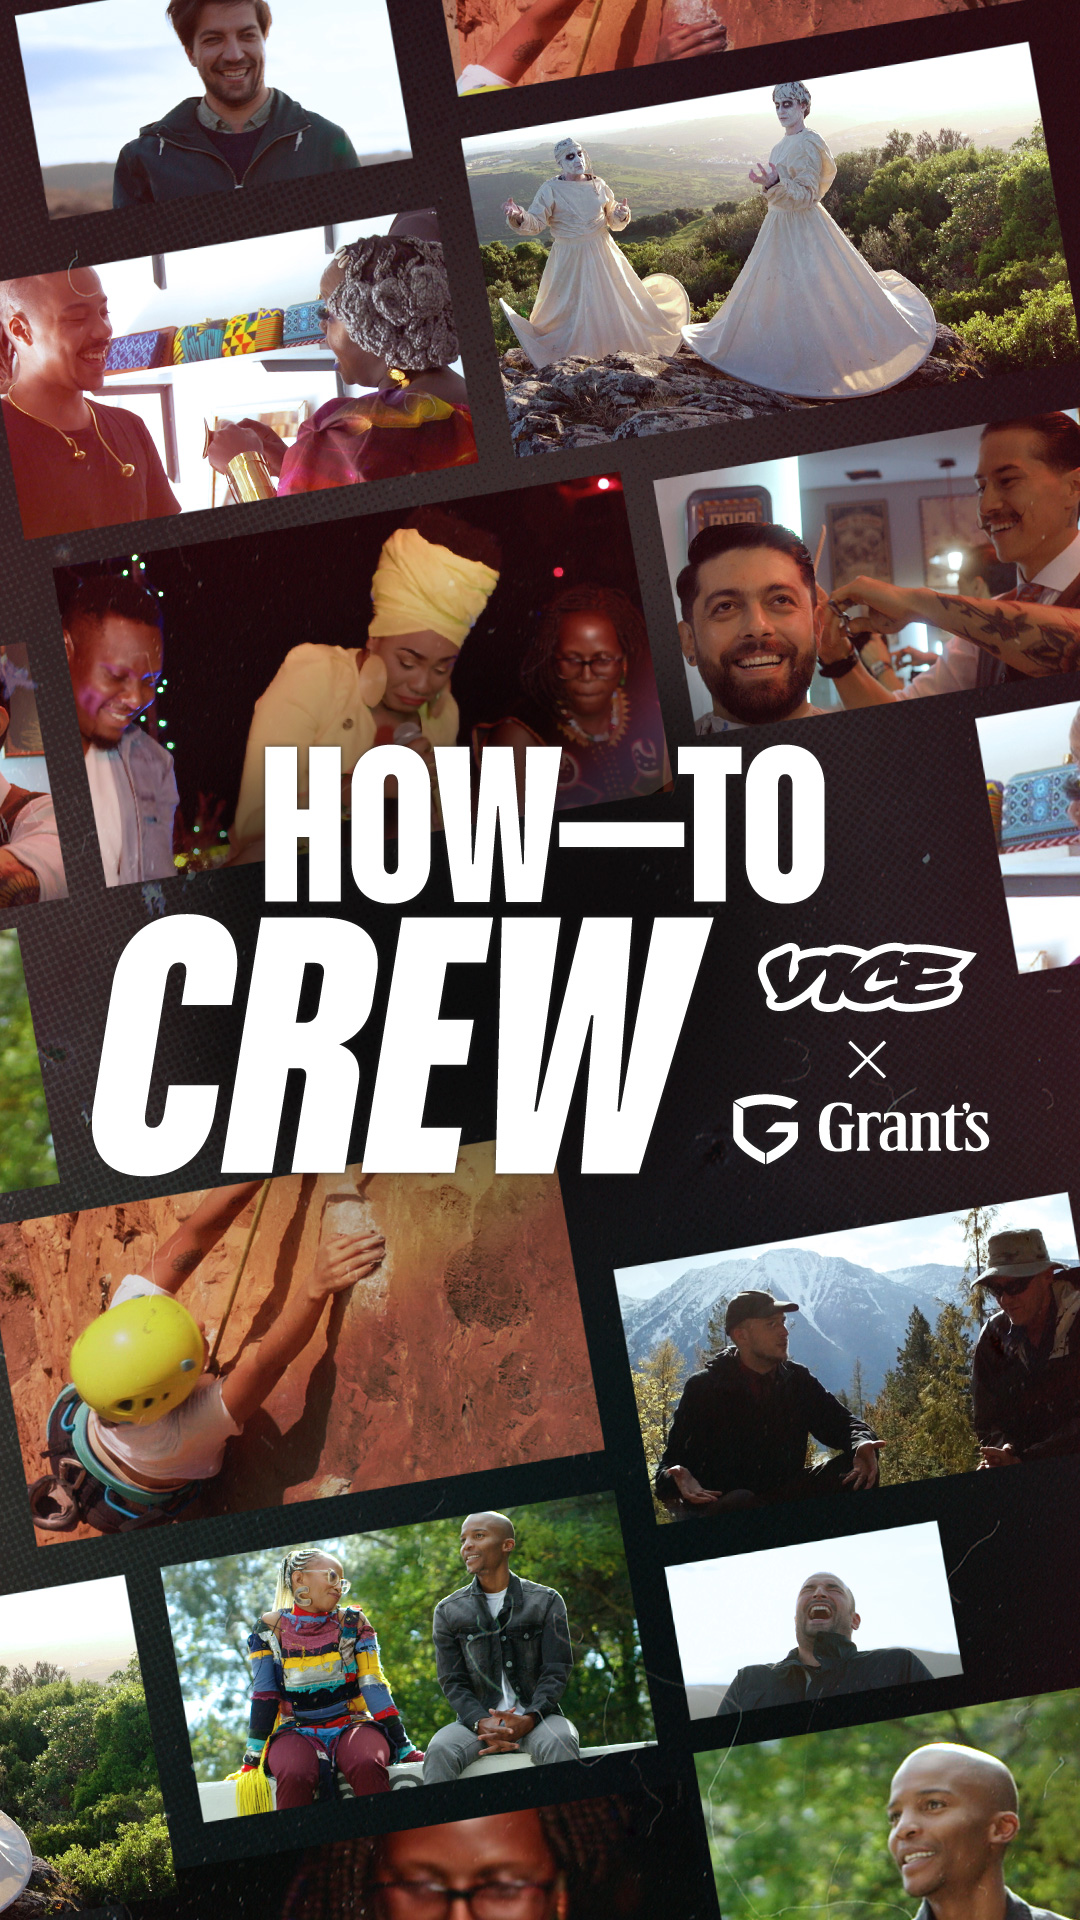 How to crew episodes collage 